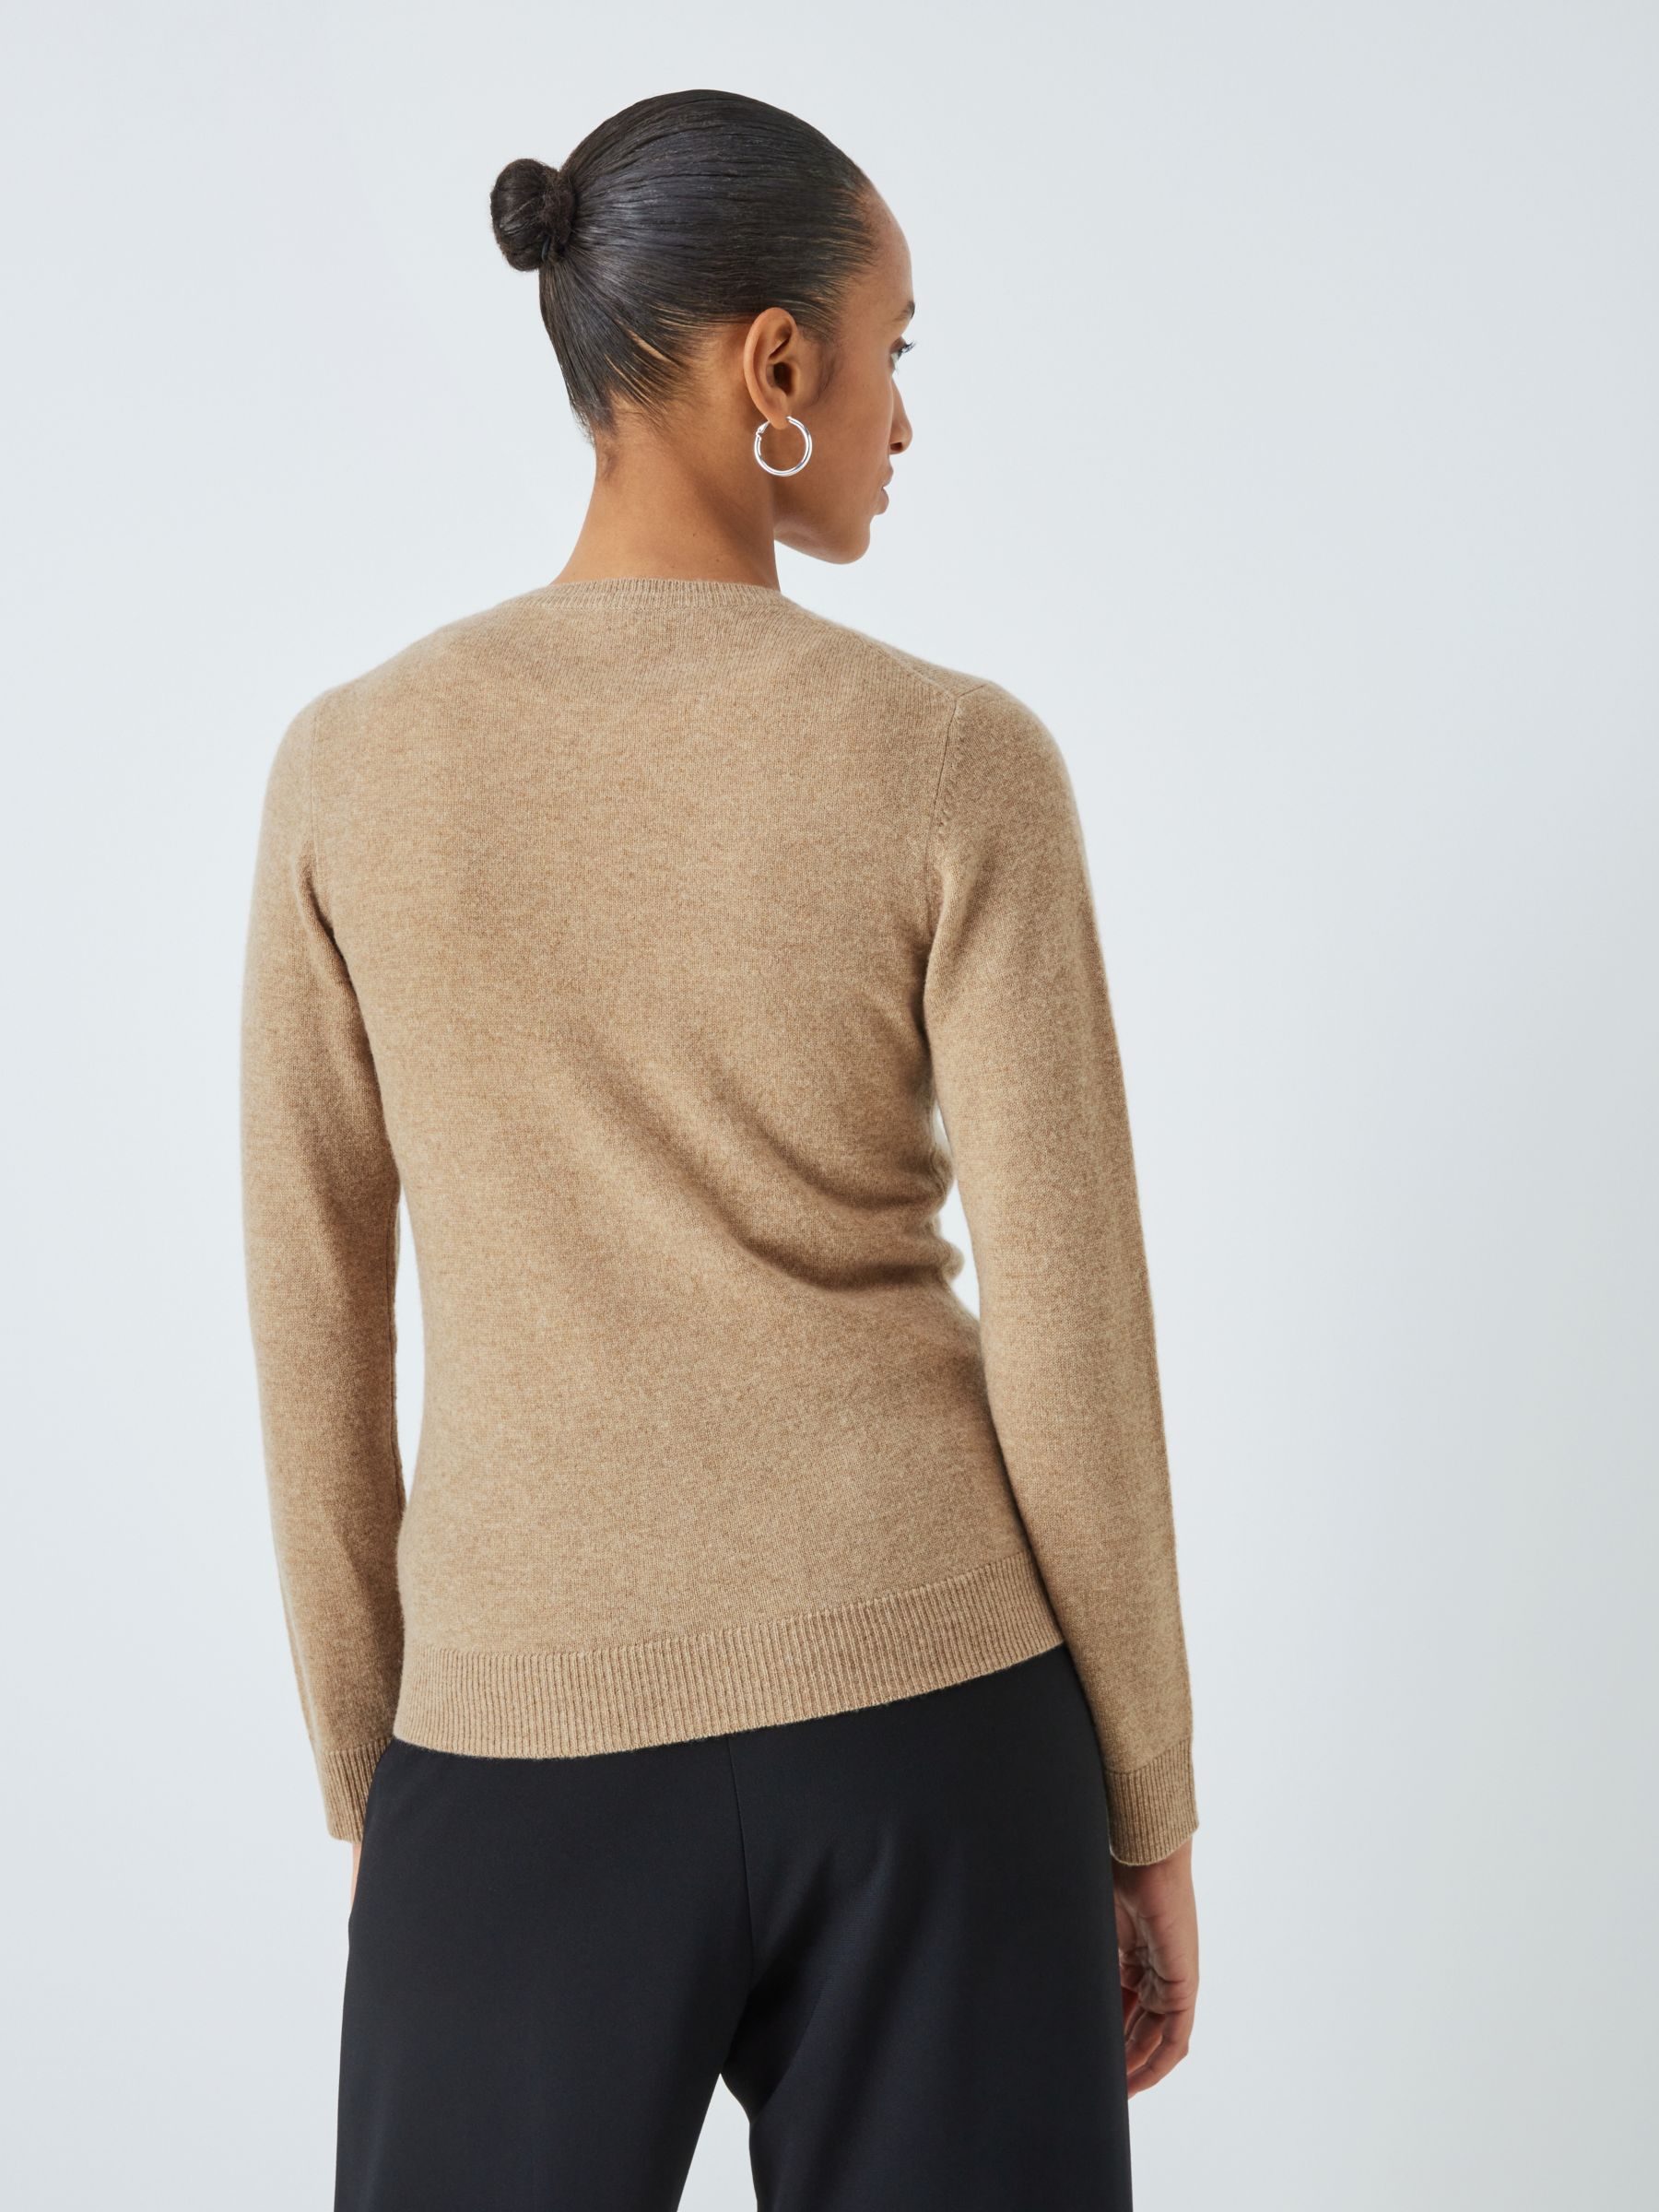 John Lewis Authenticated Cashmere Knitwear